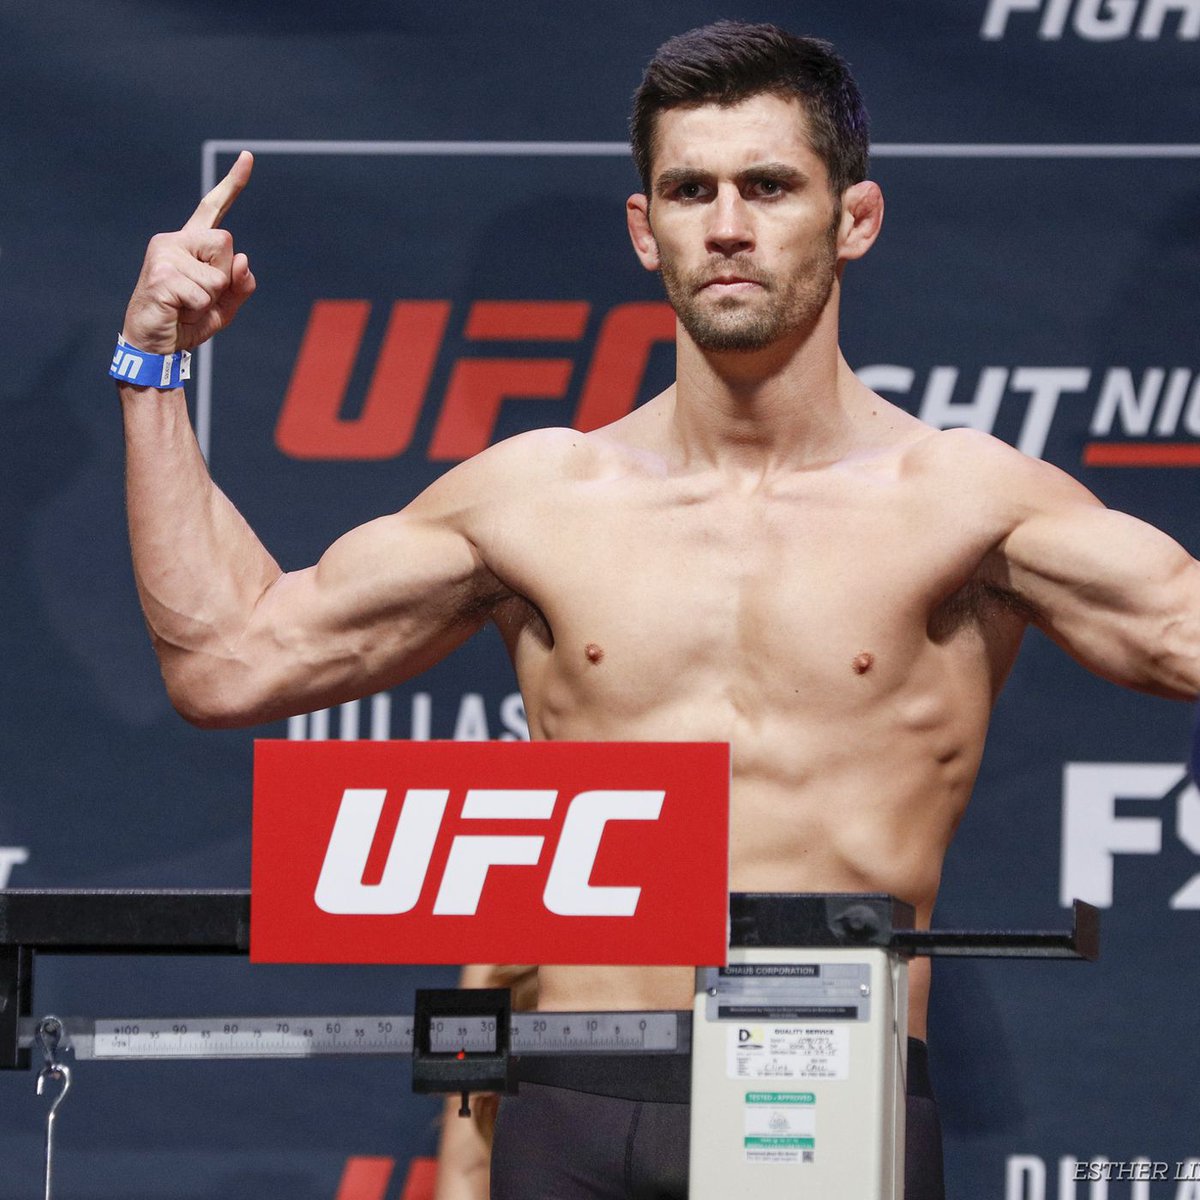 UFC 269

Dominick Cruz ML vs Pedro Munhoz @ 2.46 (2u Coolbet)

I don't think Cruz is done yet and I also don't believe what many others are saying - that Pedro will demolish Cruz with leg kicks. He might be one of the sports most cerebral fighters which I love.

#UFC269 https://t.co/4DJaXJys4a